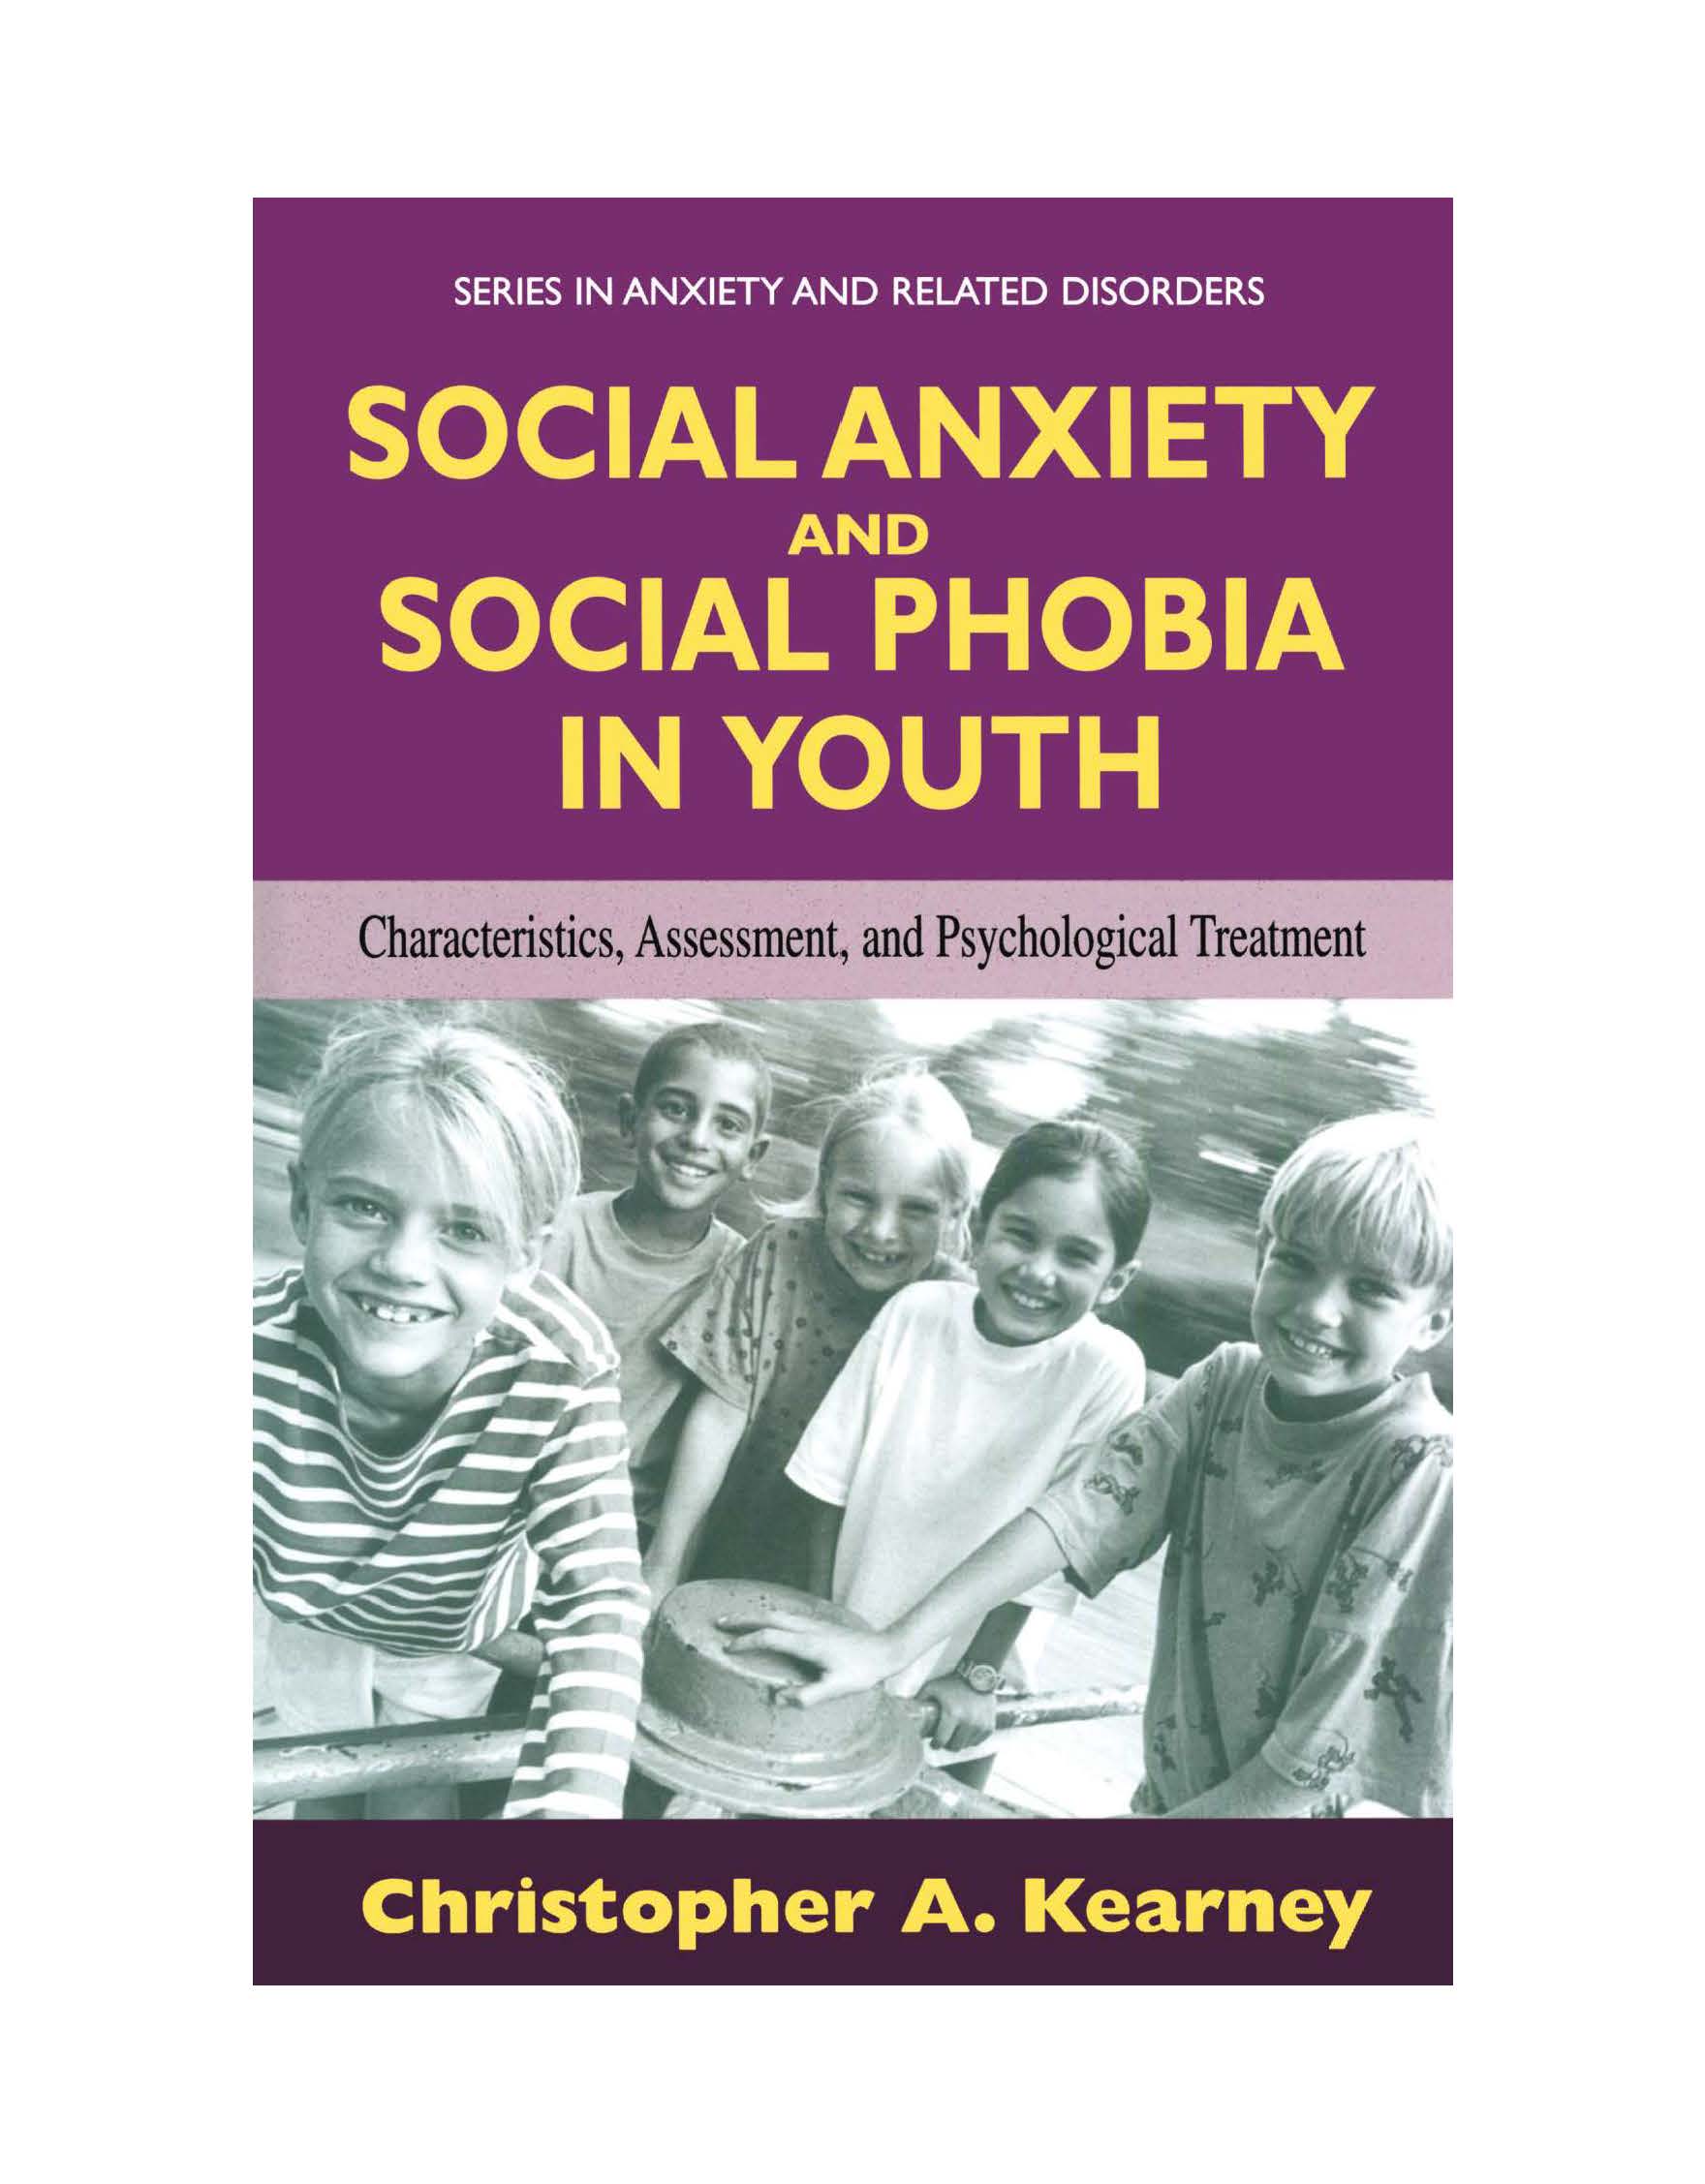 Social anxiety and social phobia in youth : characteristics, assessment, andpsychological treatment